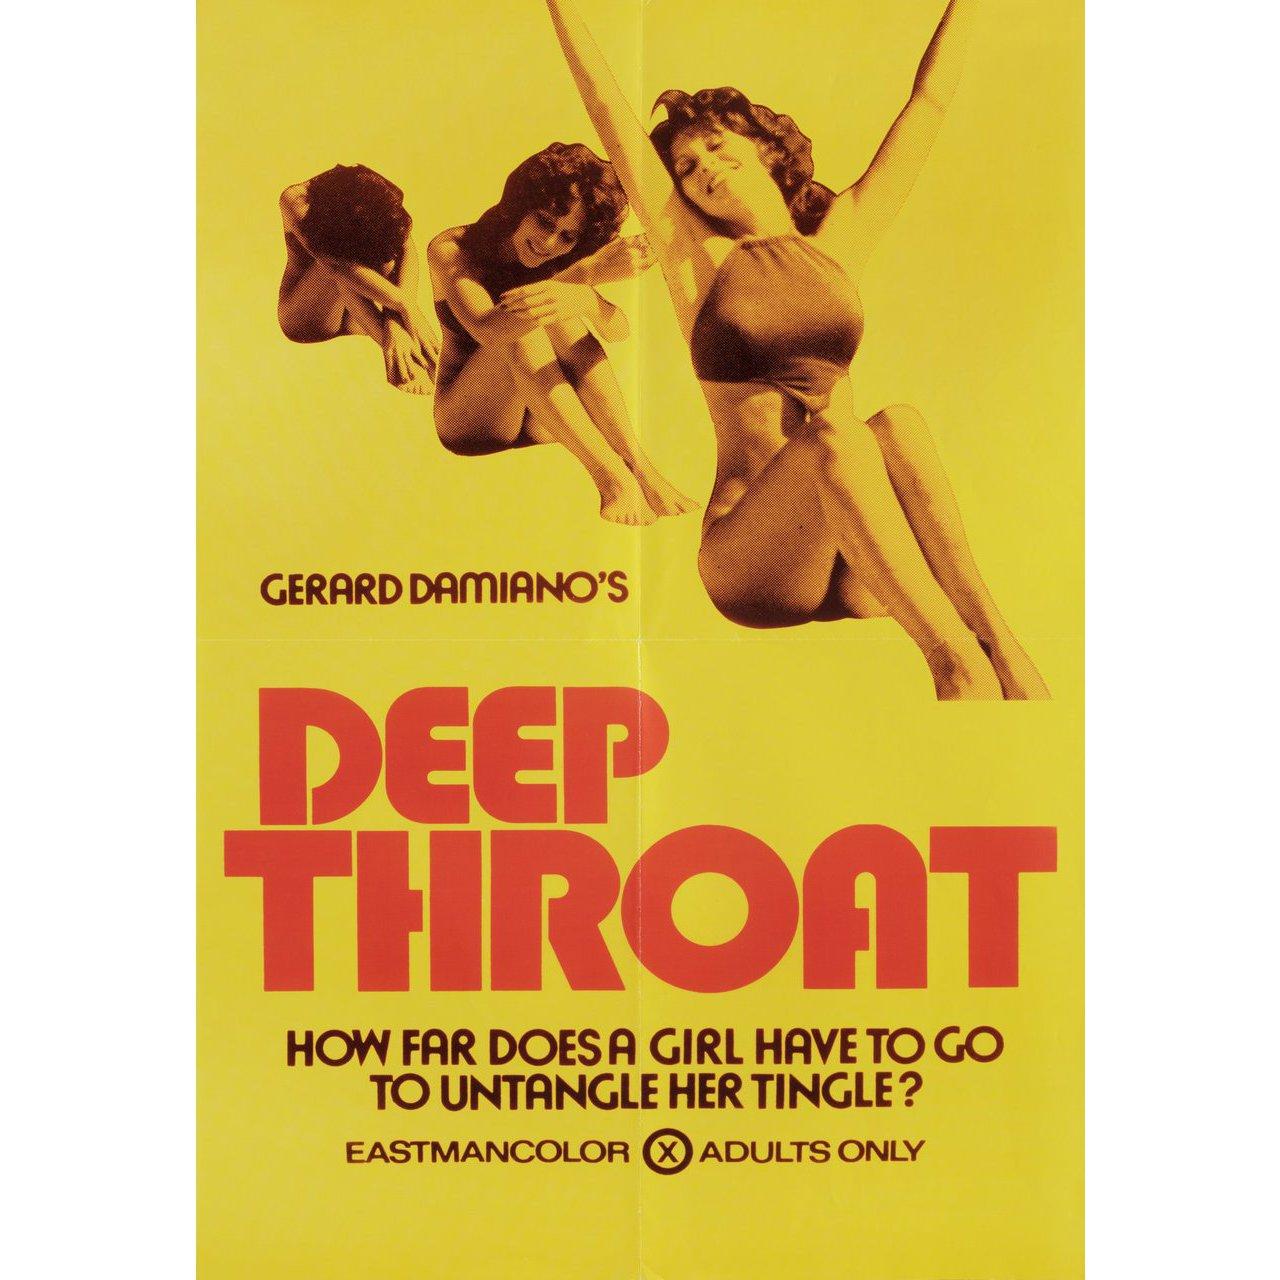 Original 1972 U.S. poster for the film Deep Throat directed by Gerard Damiano with Harry Reems / Dolly Sharp / Bill Harrison / William Love. Very Good-Fine condition, folded. Many original posters were issued folded or were subsequently folded.